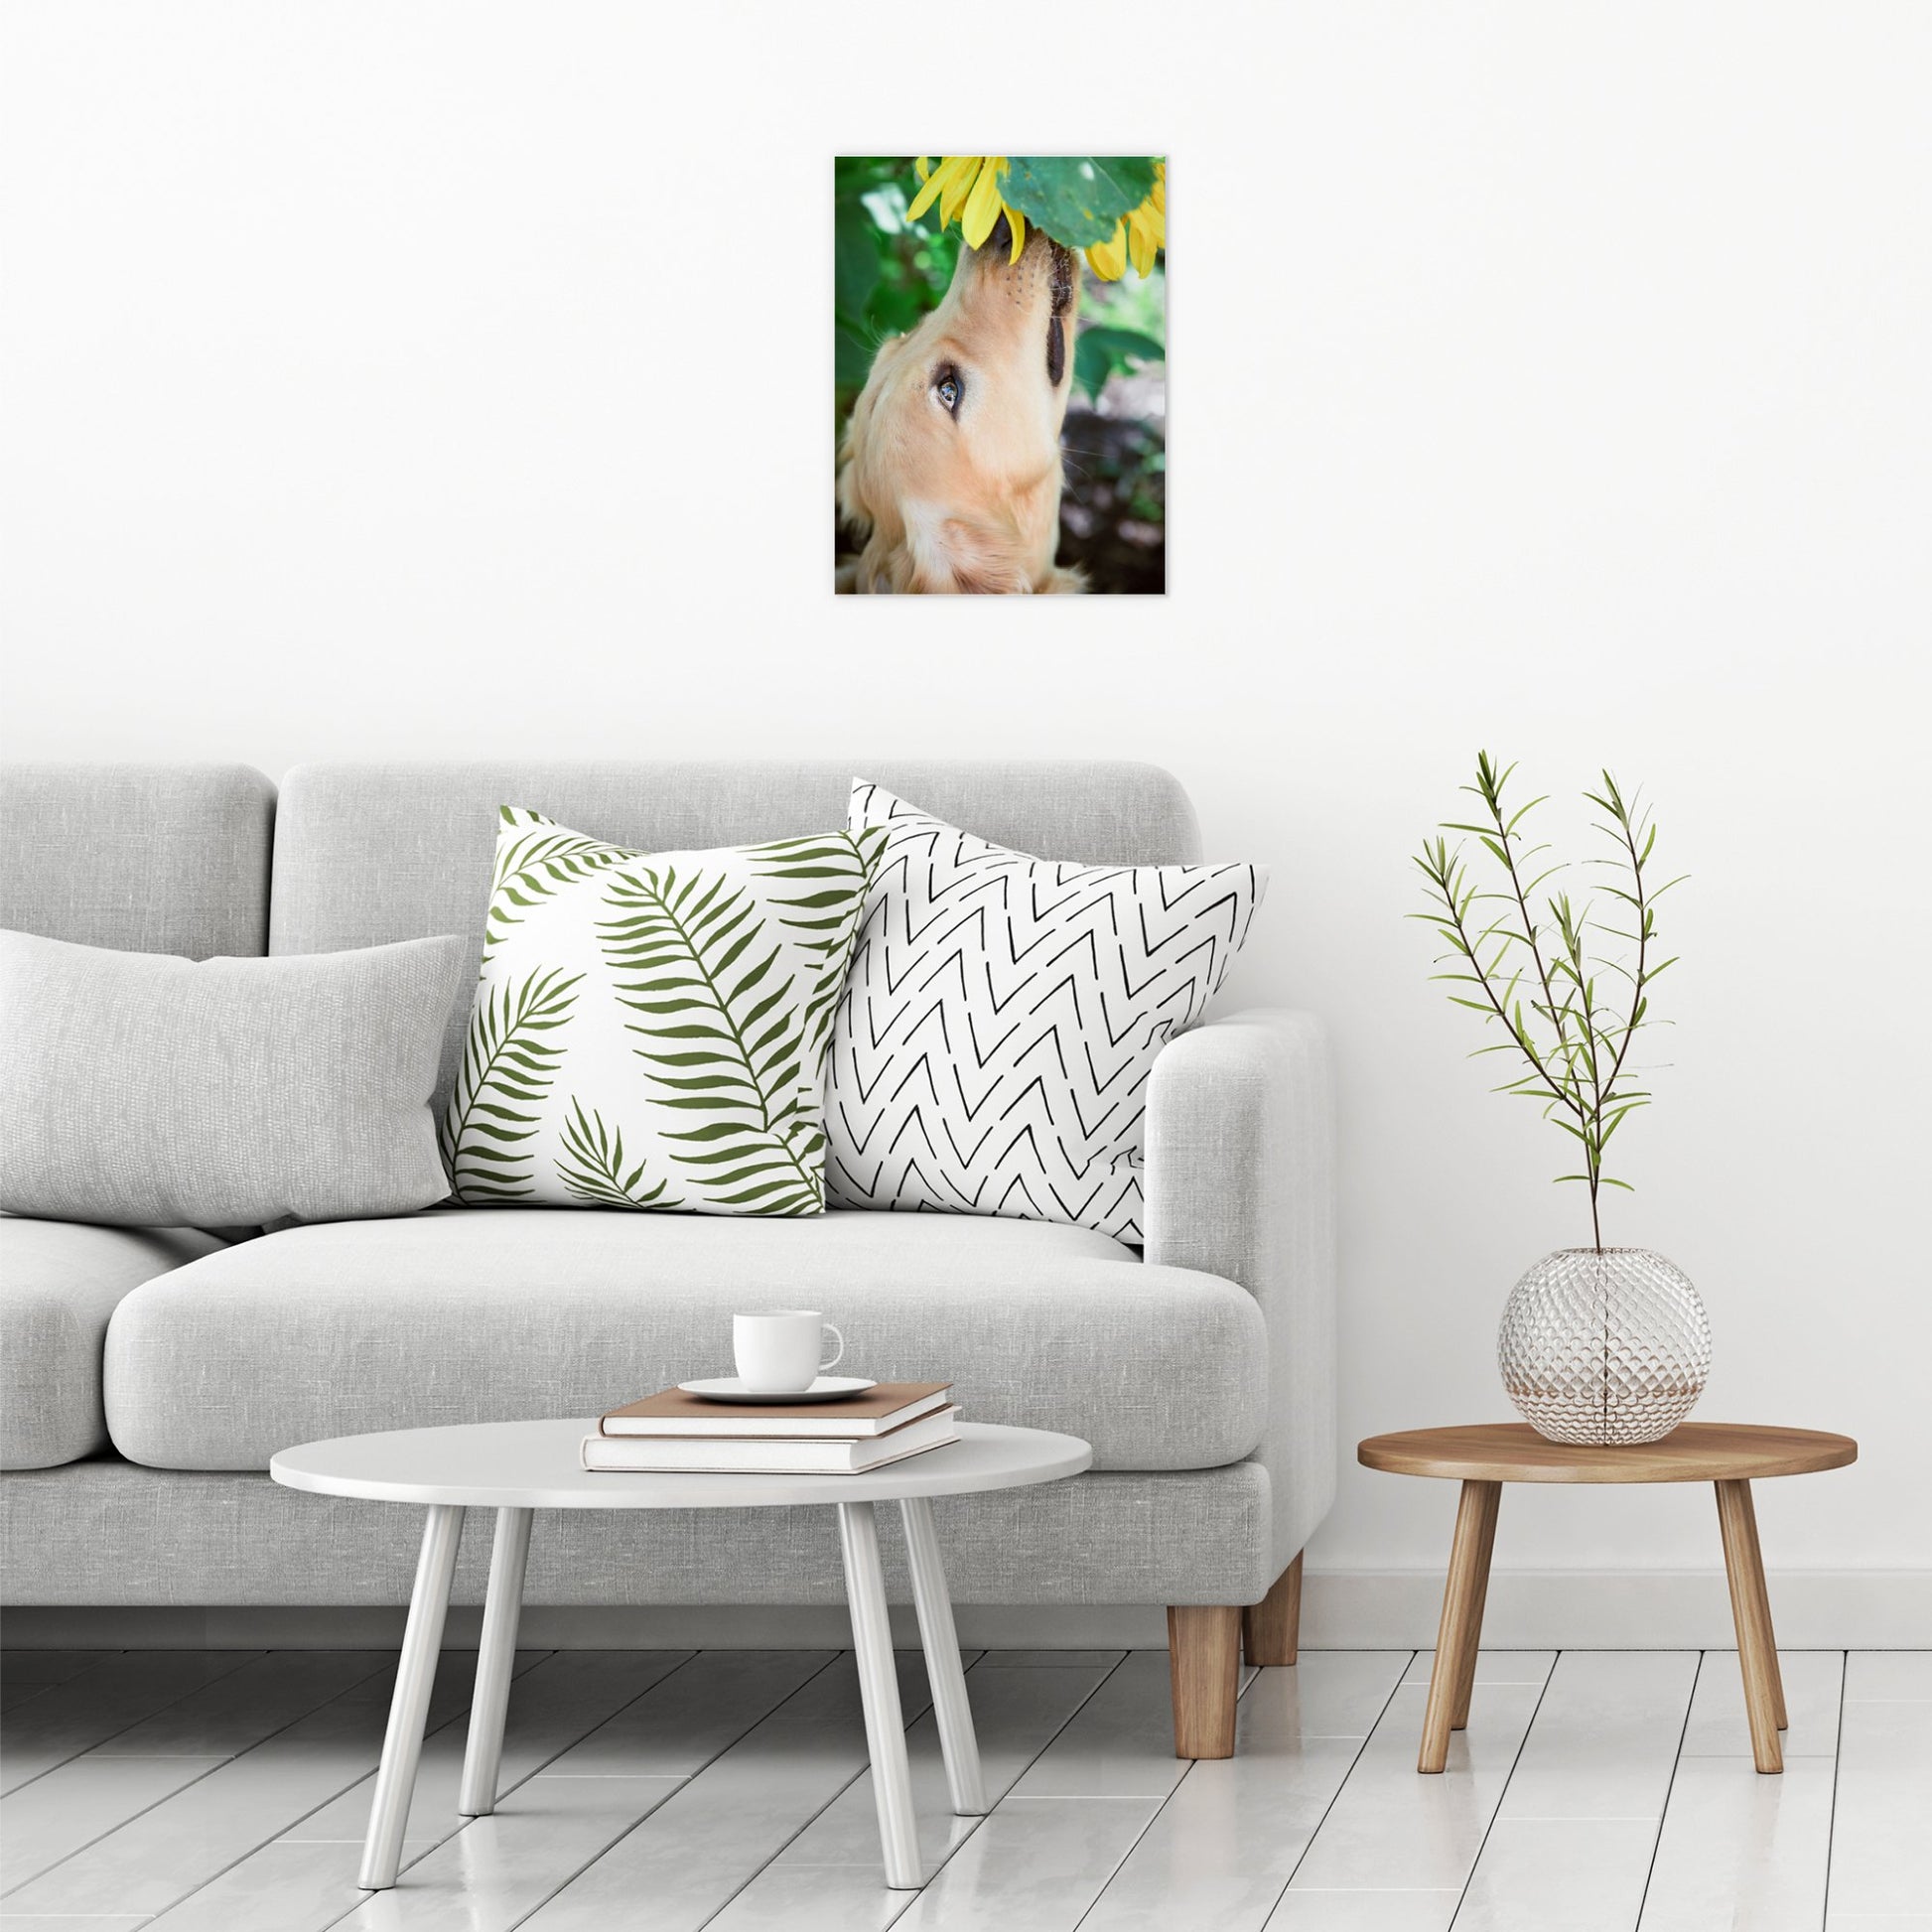 A contemporary modern room view showing a medium size metal art poster display plate with printed design of a Golden Retriever with a Flower